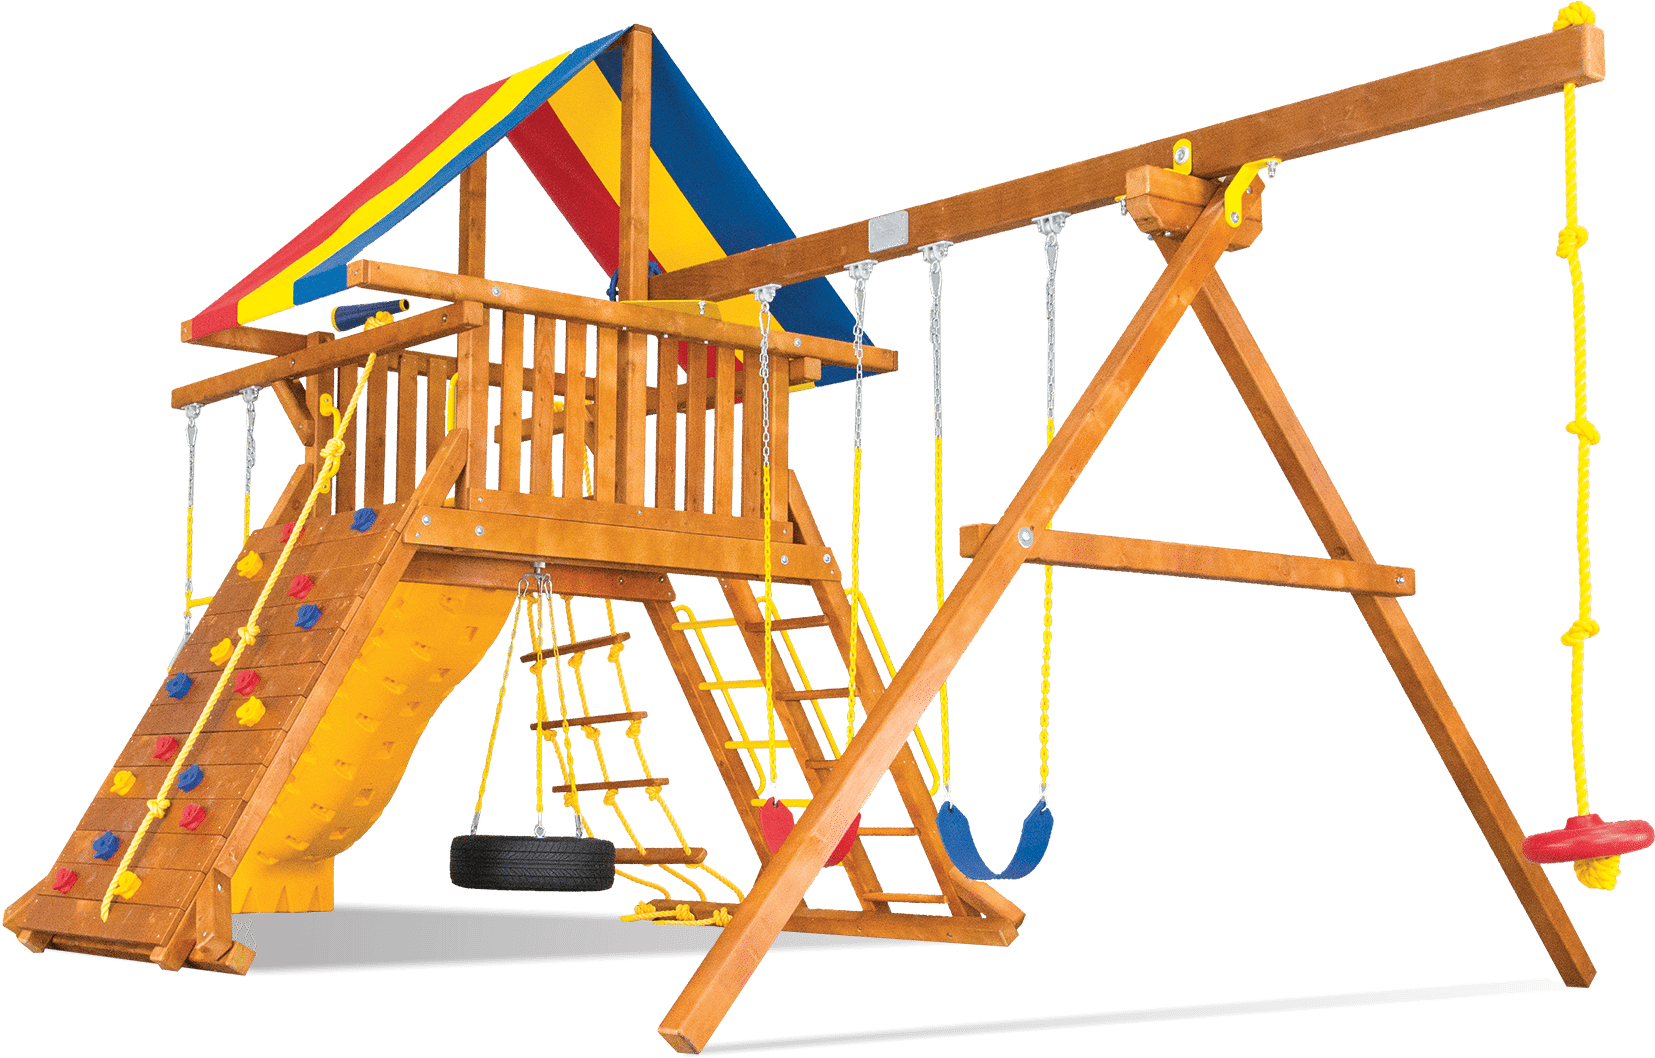 Carnival Feature Castle 29a - Playground (1693x1127)